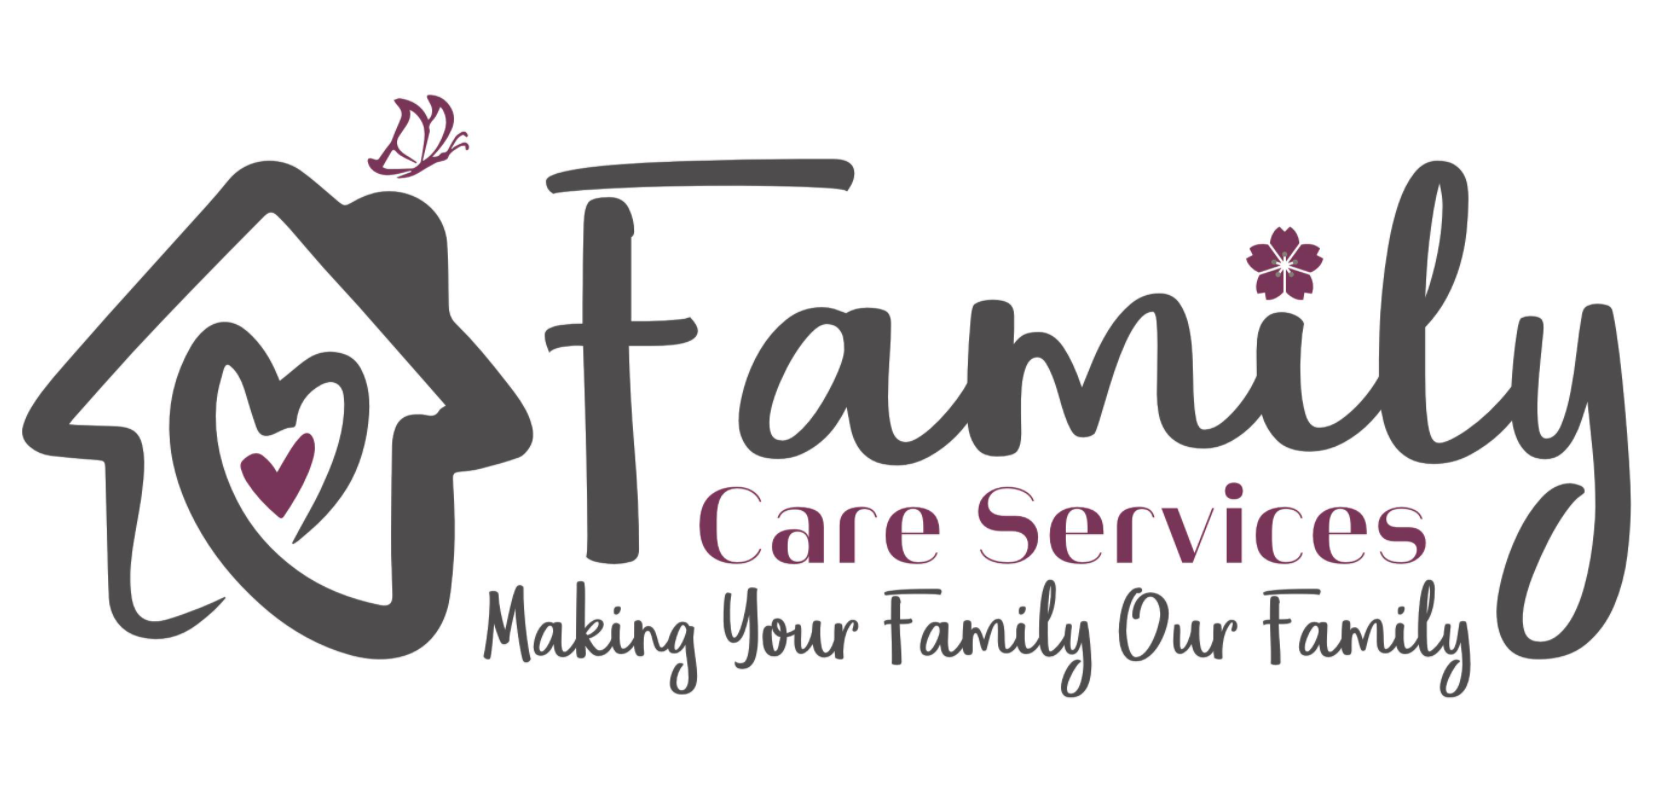 Family Care Services